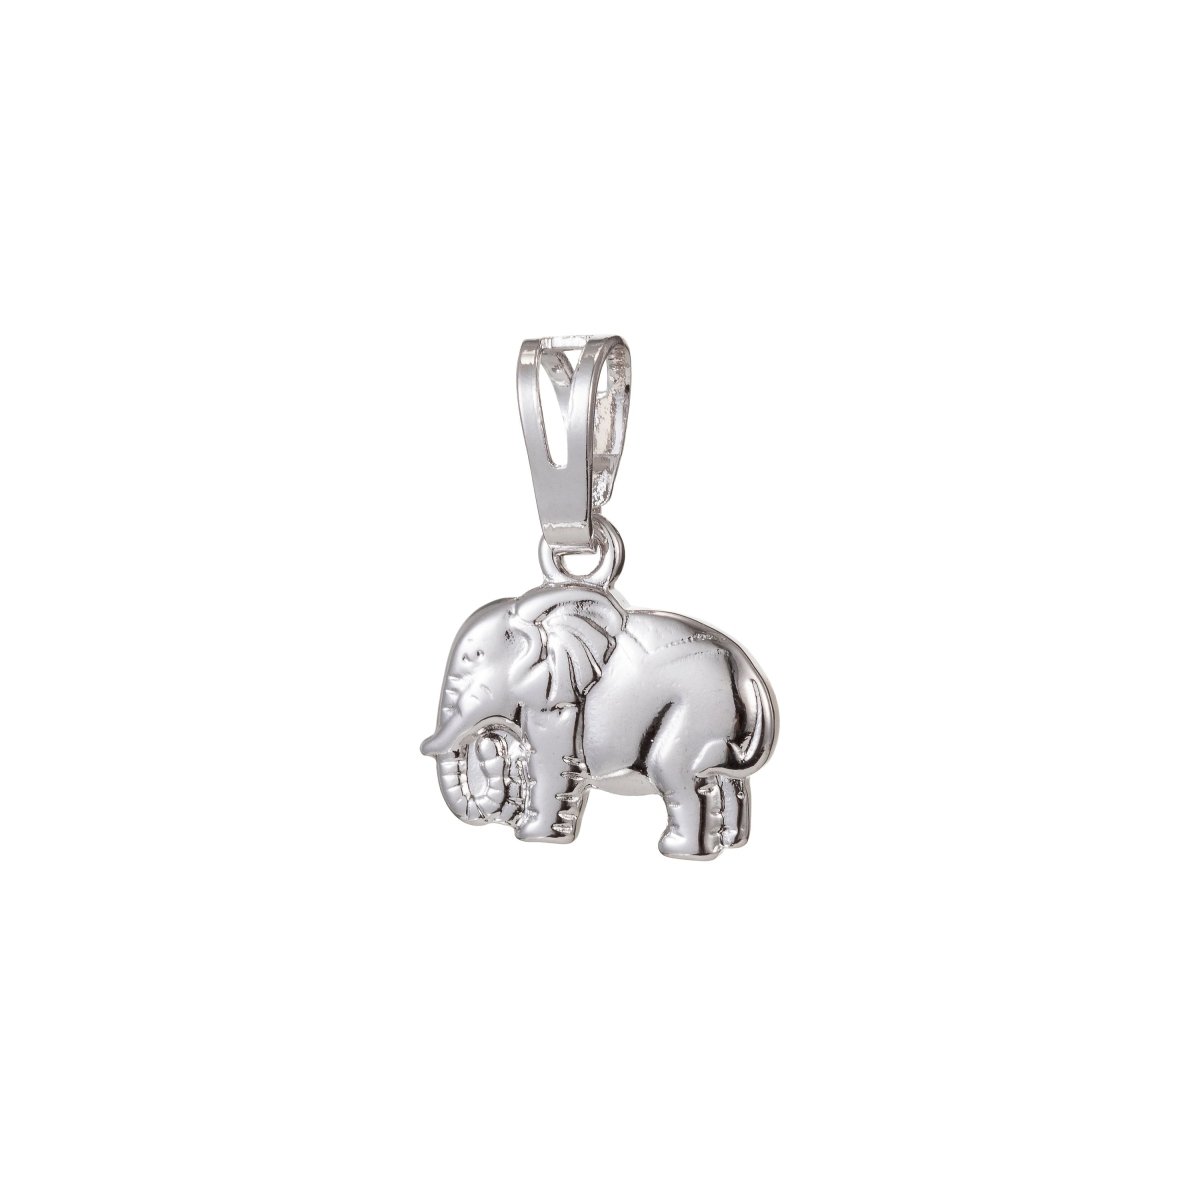 White Gold Filled Micro Pave CZ Elephant Pendant Charm, Elephant Pendant Charm, White Gold Elephant Pendant, For DIY Jewelry I-492 - DLUXCA